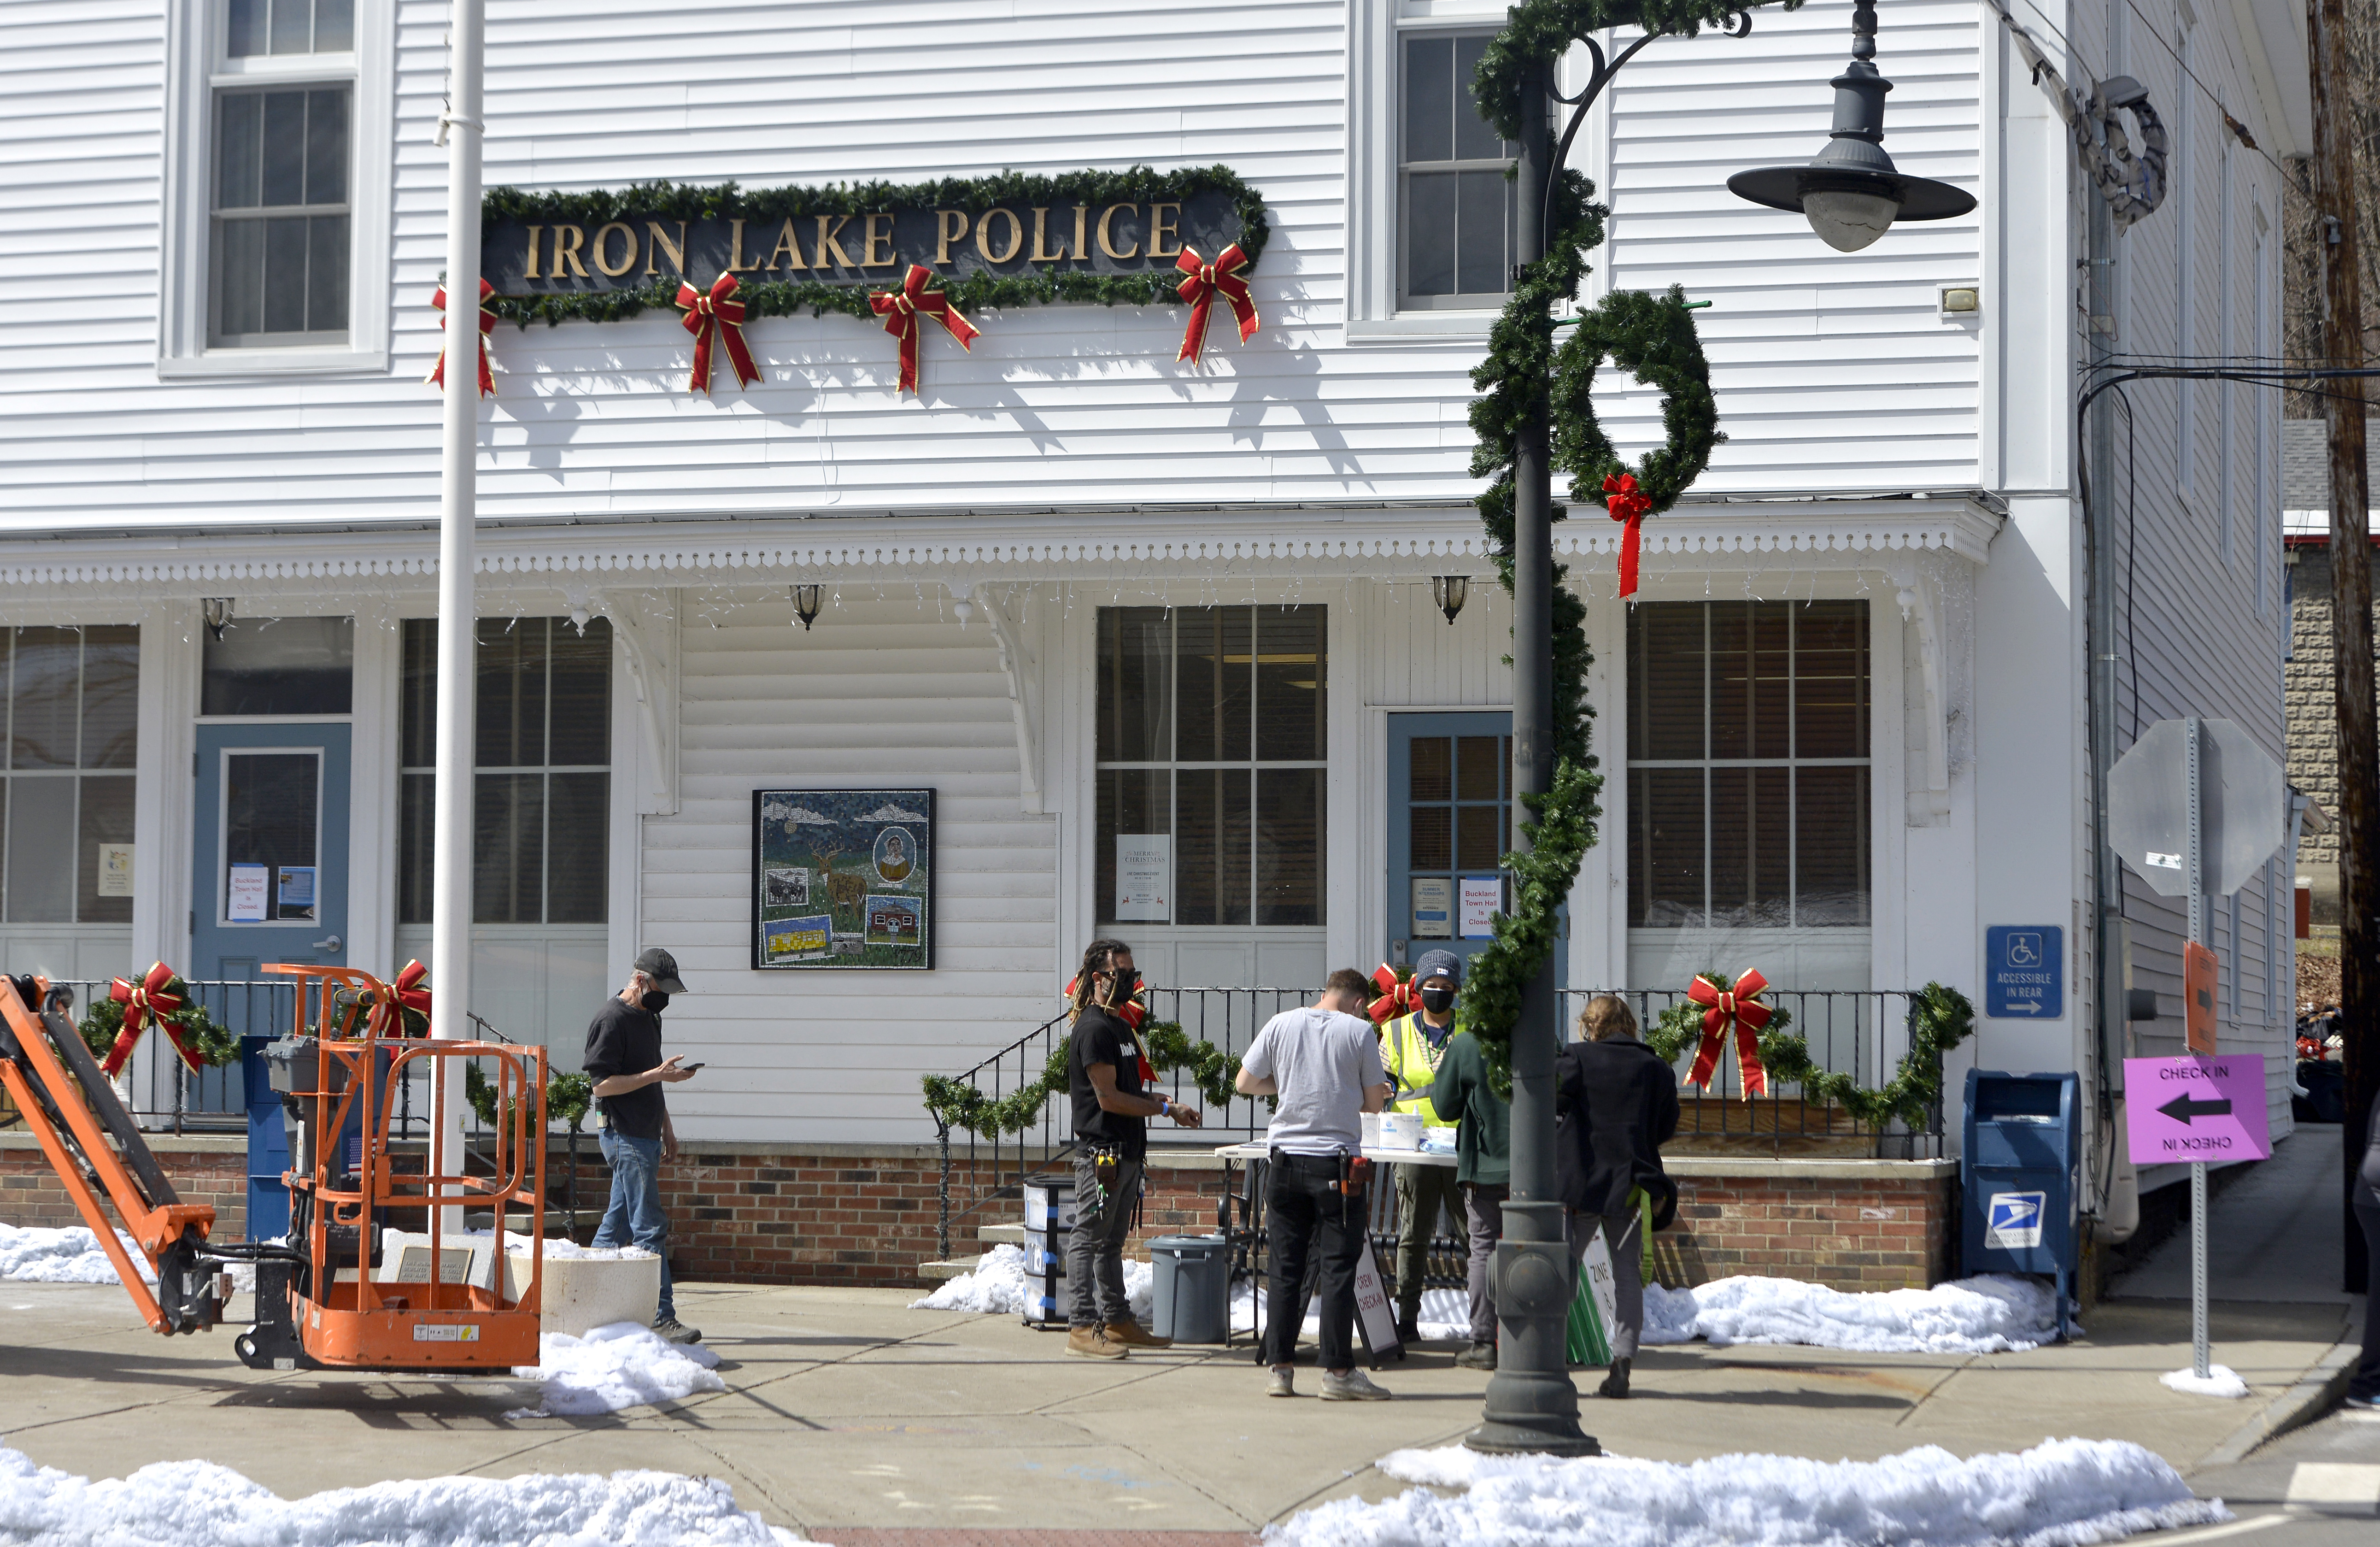 The Buckland Town Hall has been transformed into the fictional Iron Lake Police headquarters for the filming of the show Dexter in Shelburne Falls, April 7, 2021.  (Don Treeger / The Republican)